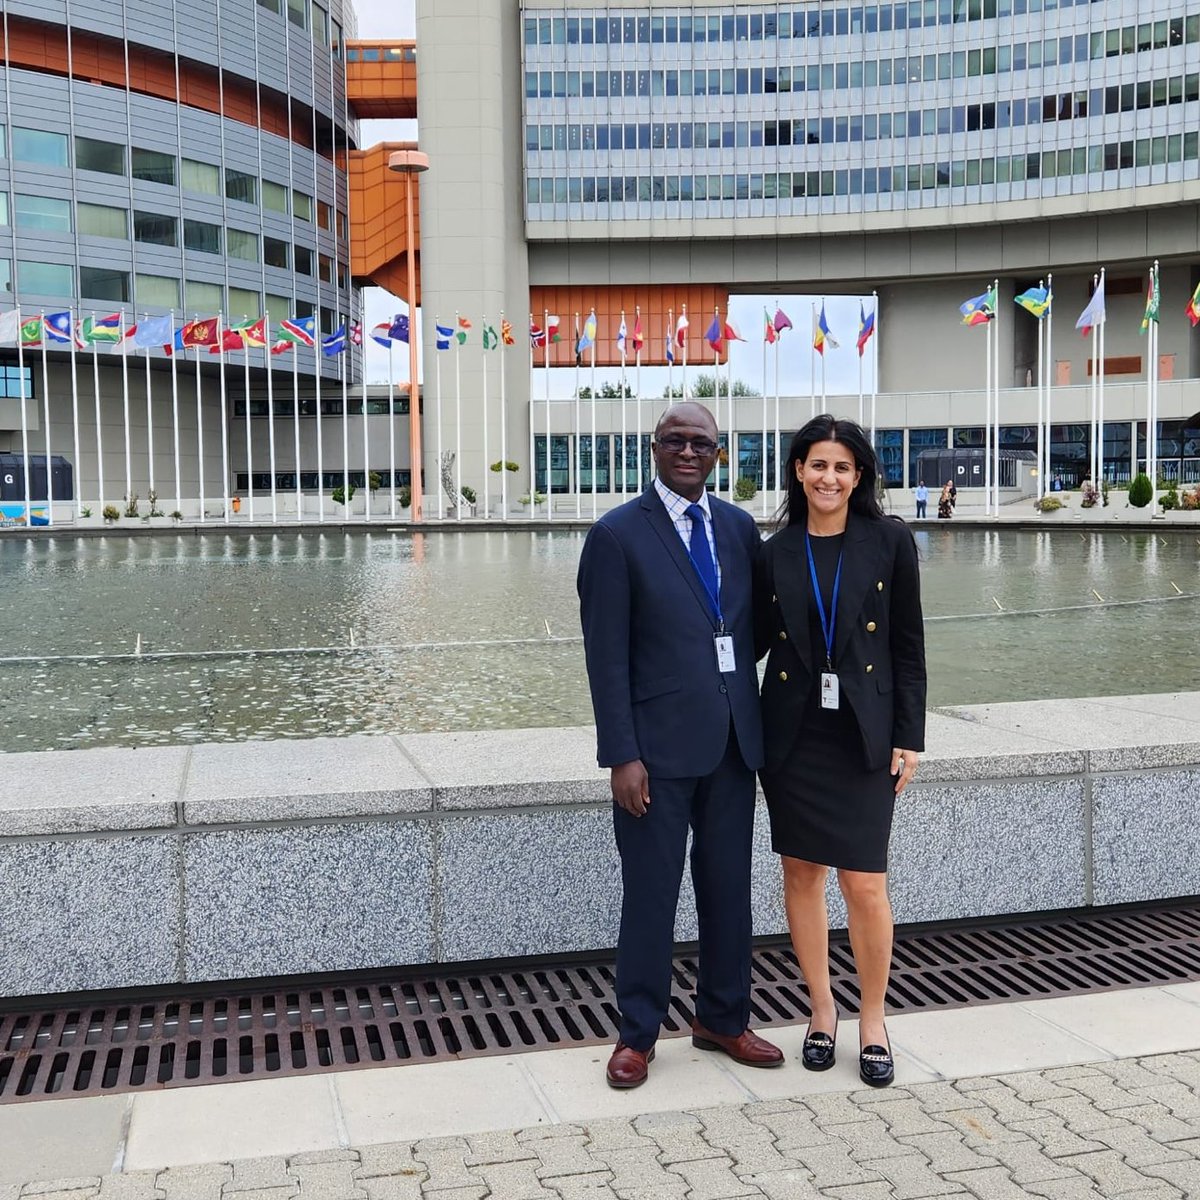 CenHTRO's @DavidOkech3 + Lydia Aletraris are in Vienna, Austria this week, working on the Standard Tools for Analysis of Trafficking in Persons (STATIP) project with @ilo @UNODC @UNmigration, discussing legal definitions of #forcedlabor and #humantrafficking.